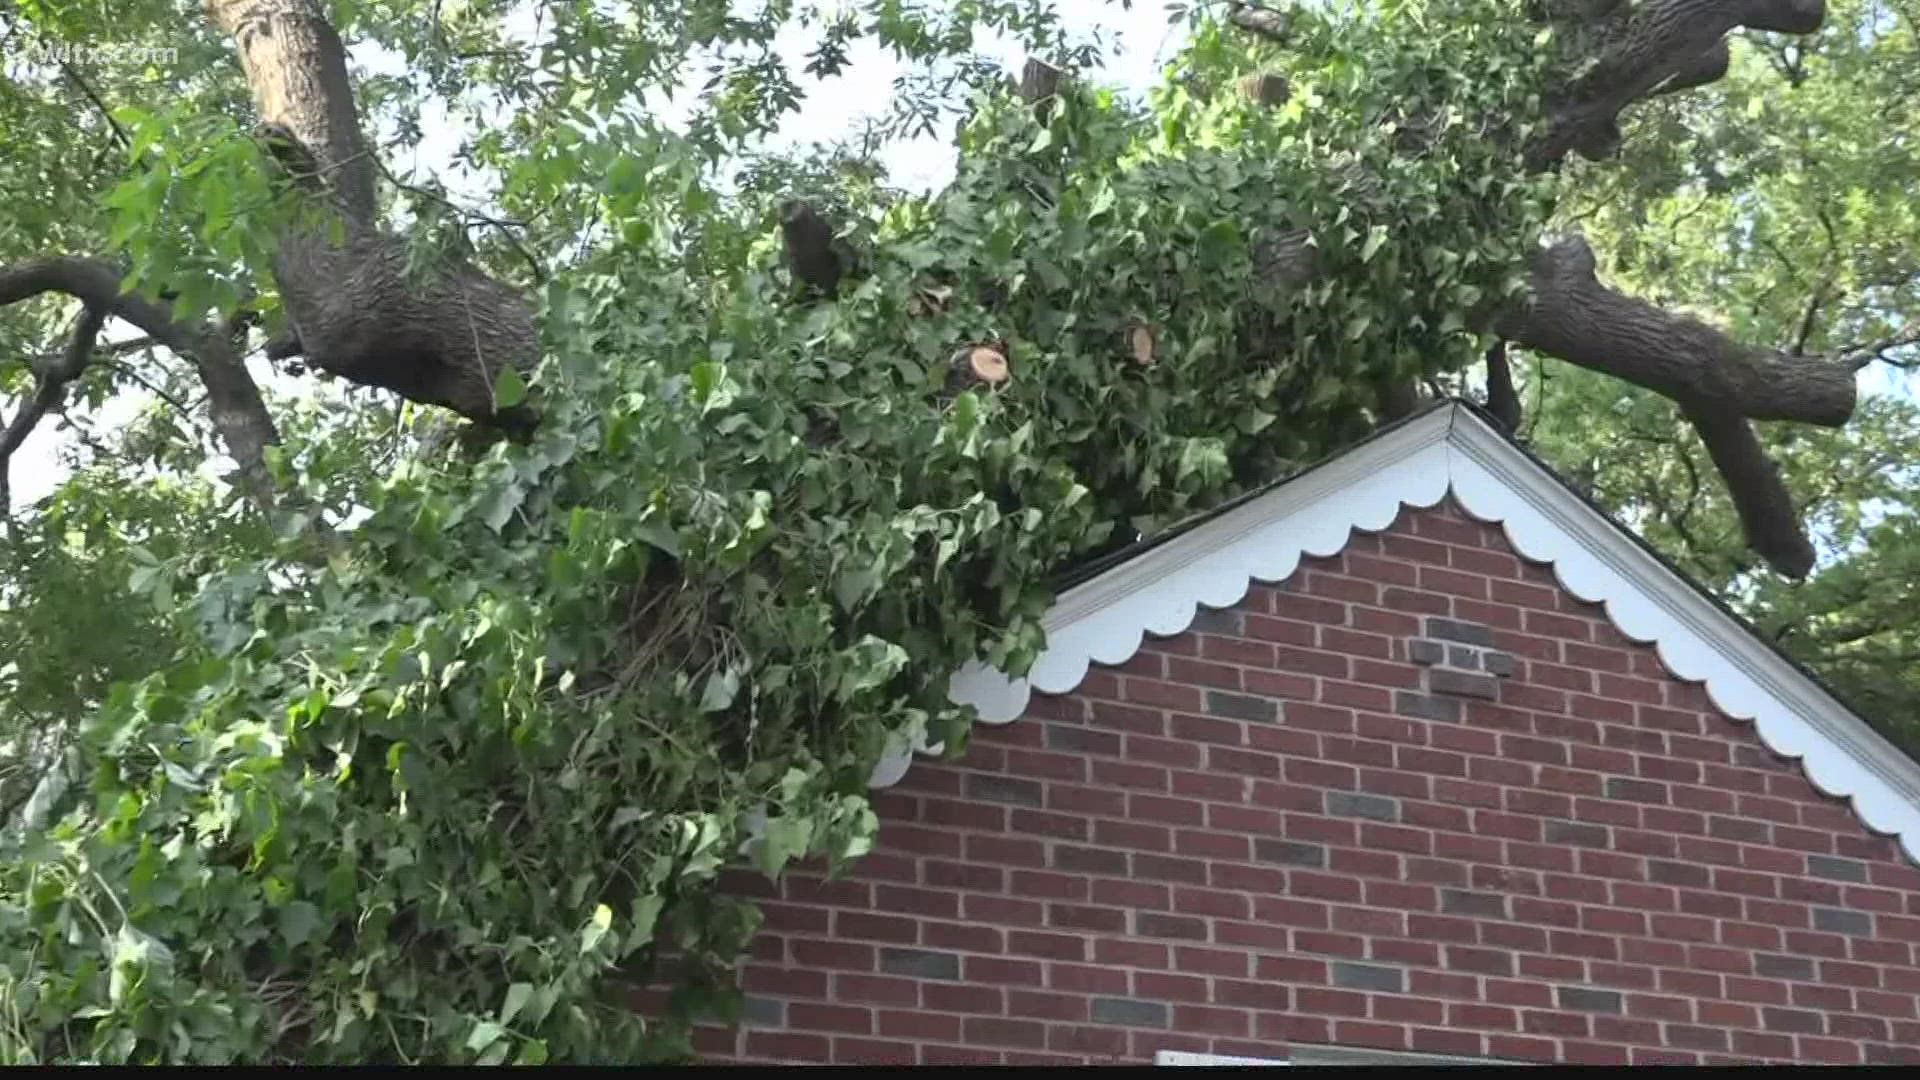 Residents in West Columbia spent the day cleaning up after a microburst caused storm damage on Tuesday.